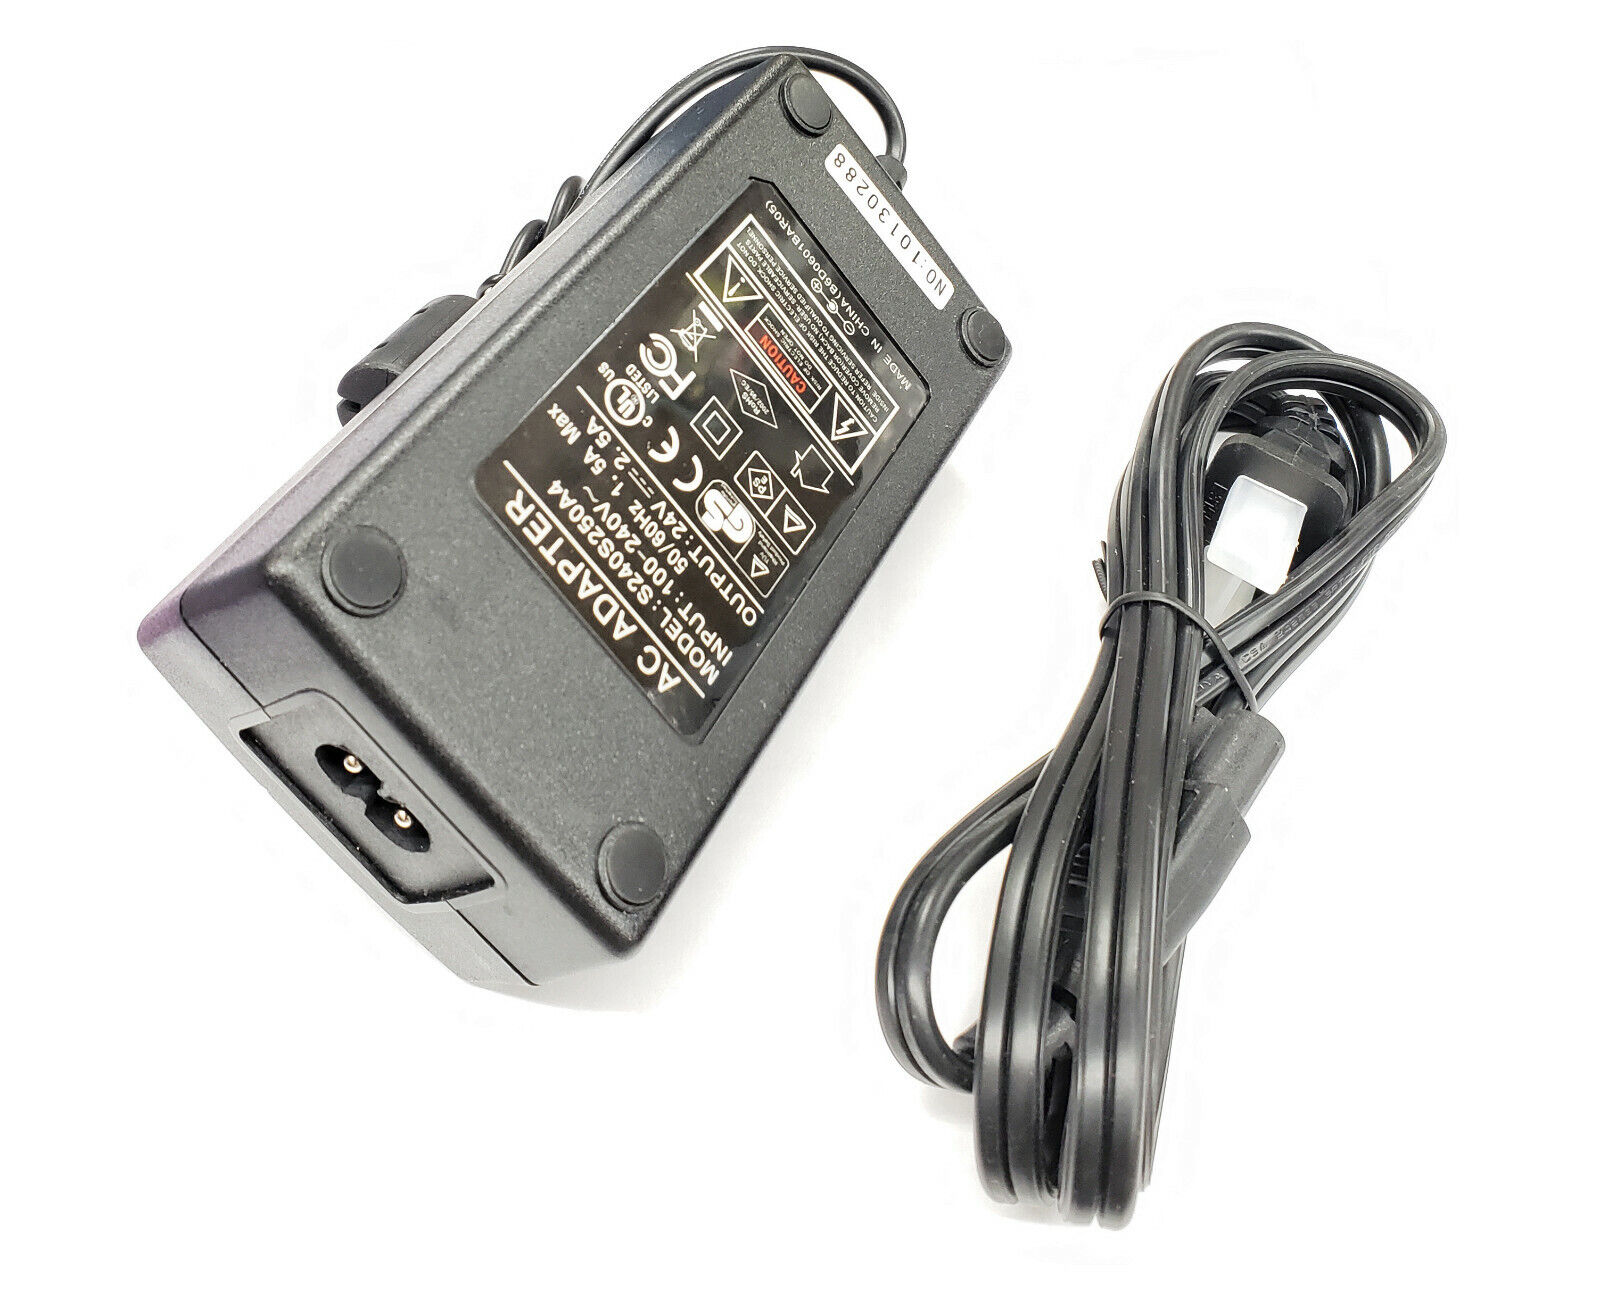 New 24V AC Adapter For DYMO LabelWriter 450 Twin Turbo Thermal Printer -175160 